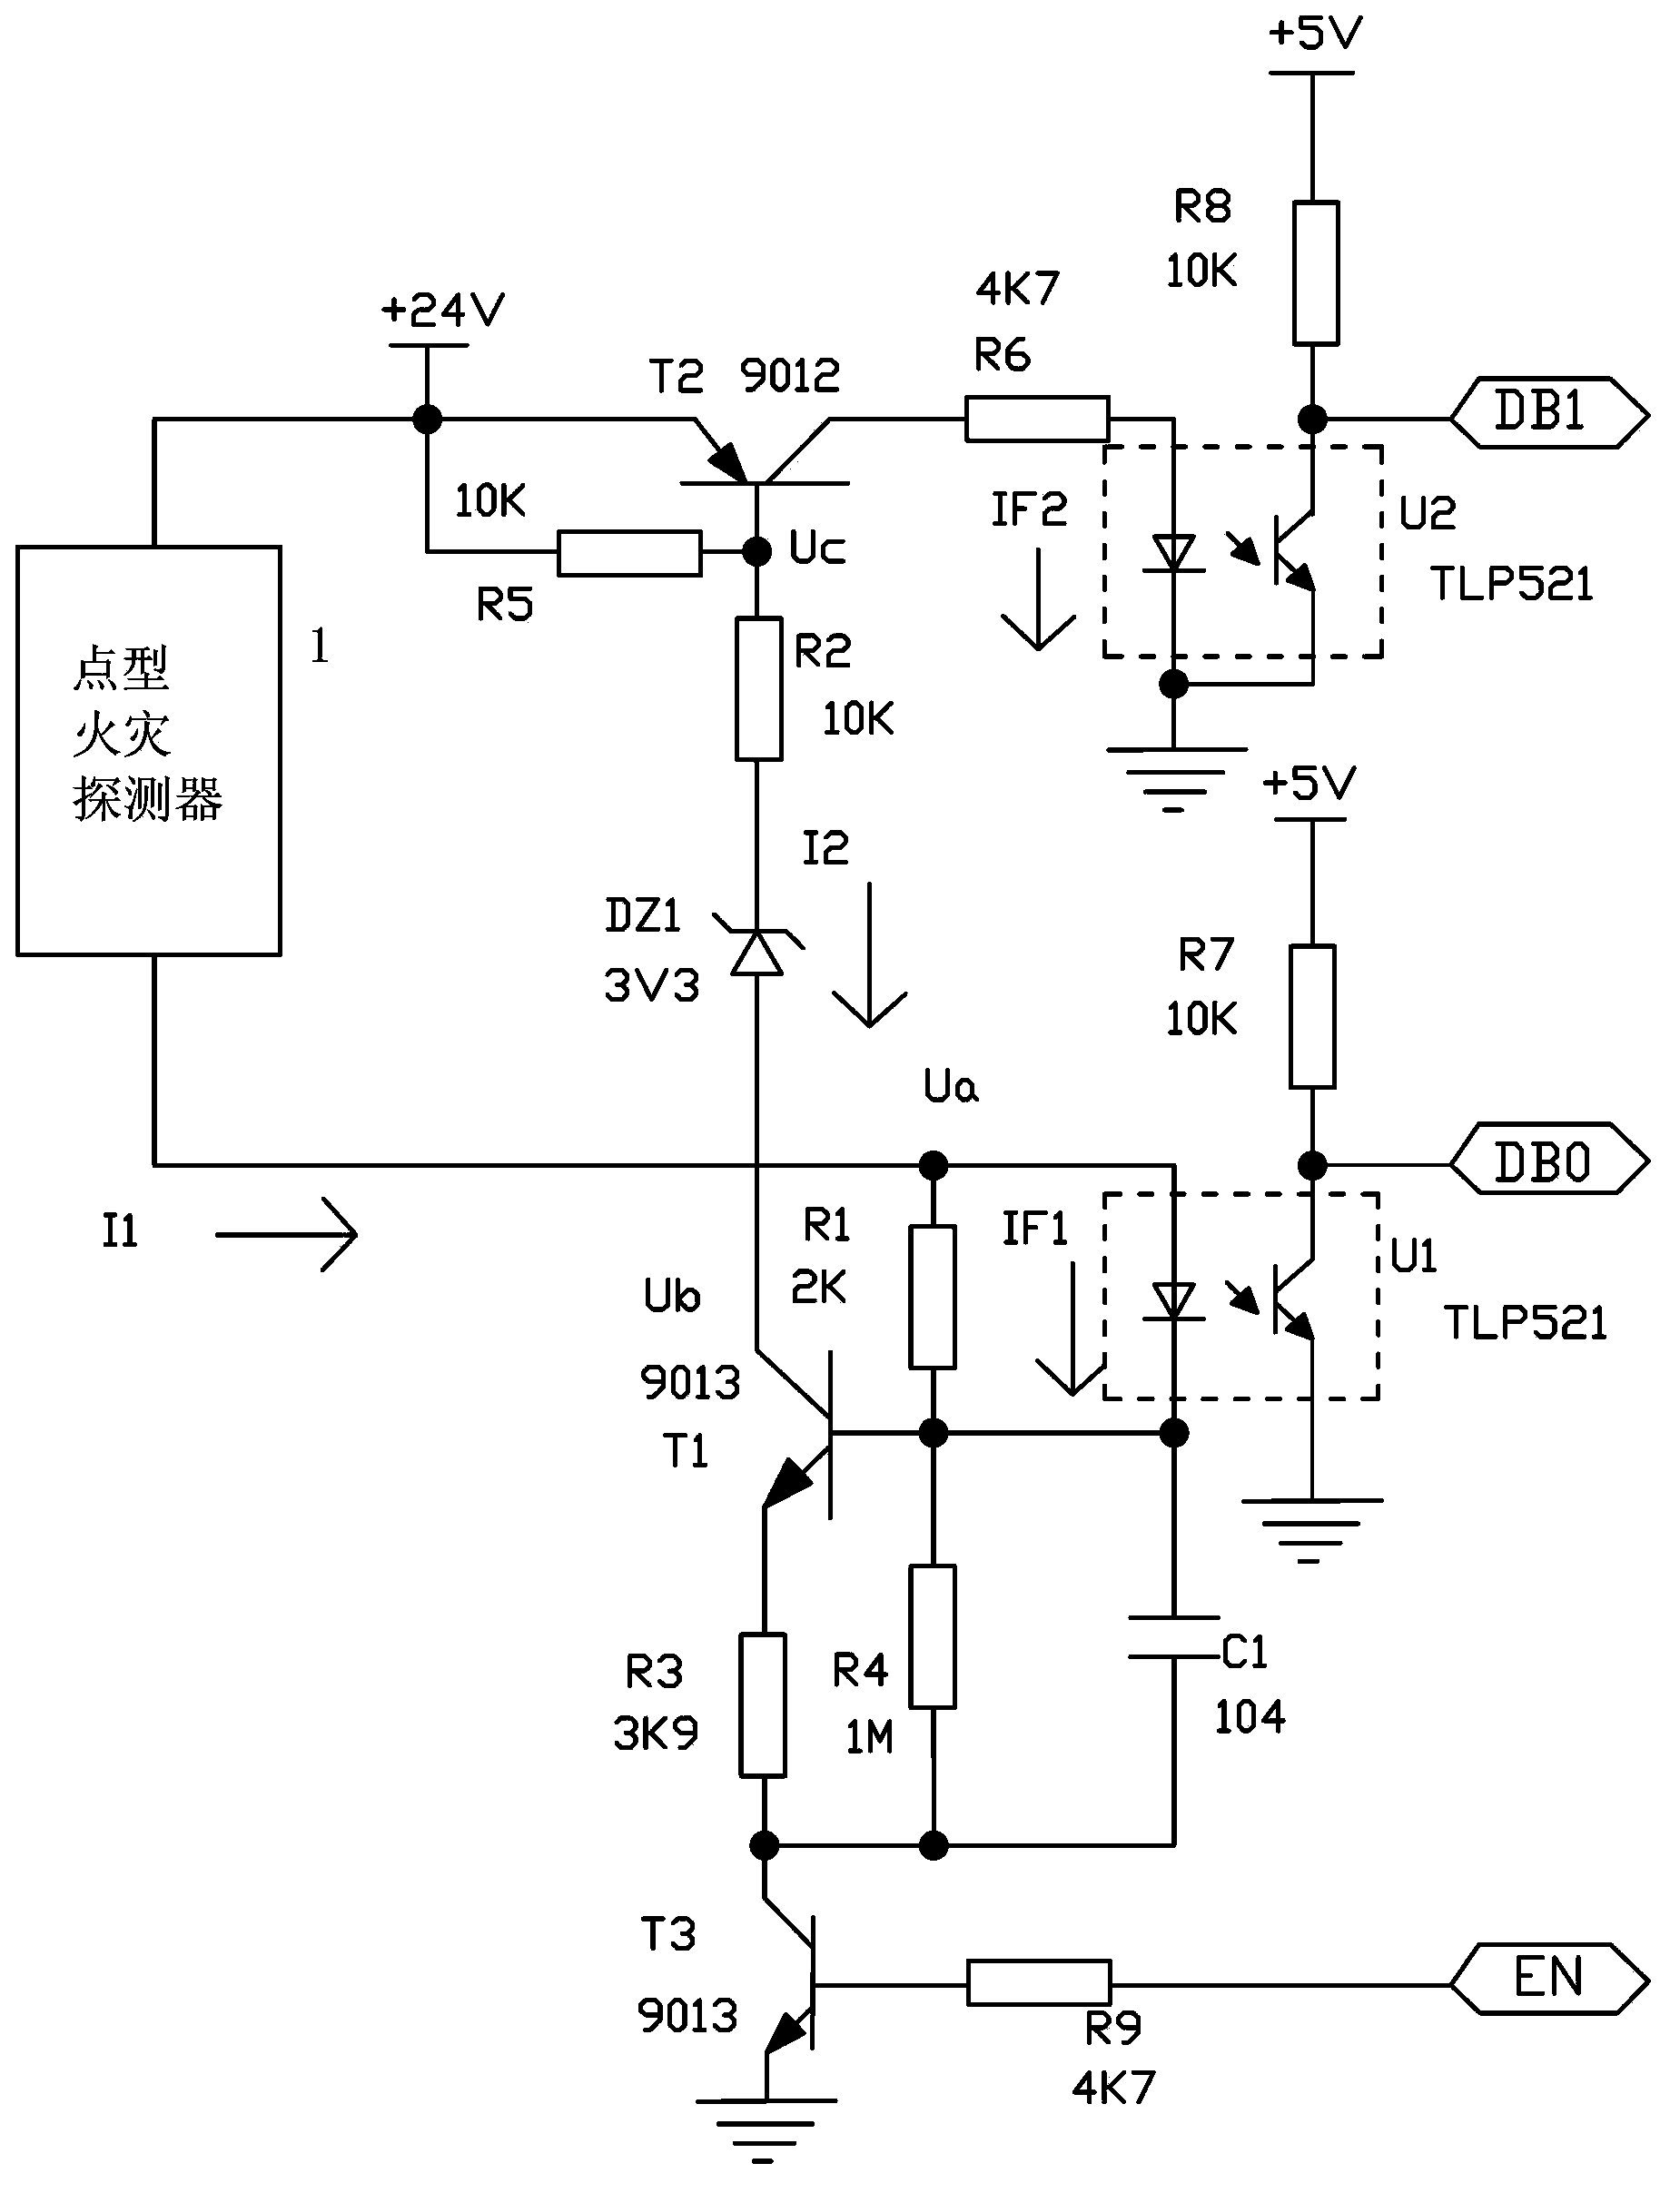 Linkage fault detection device for point type fire detector